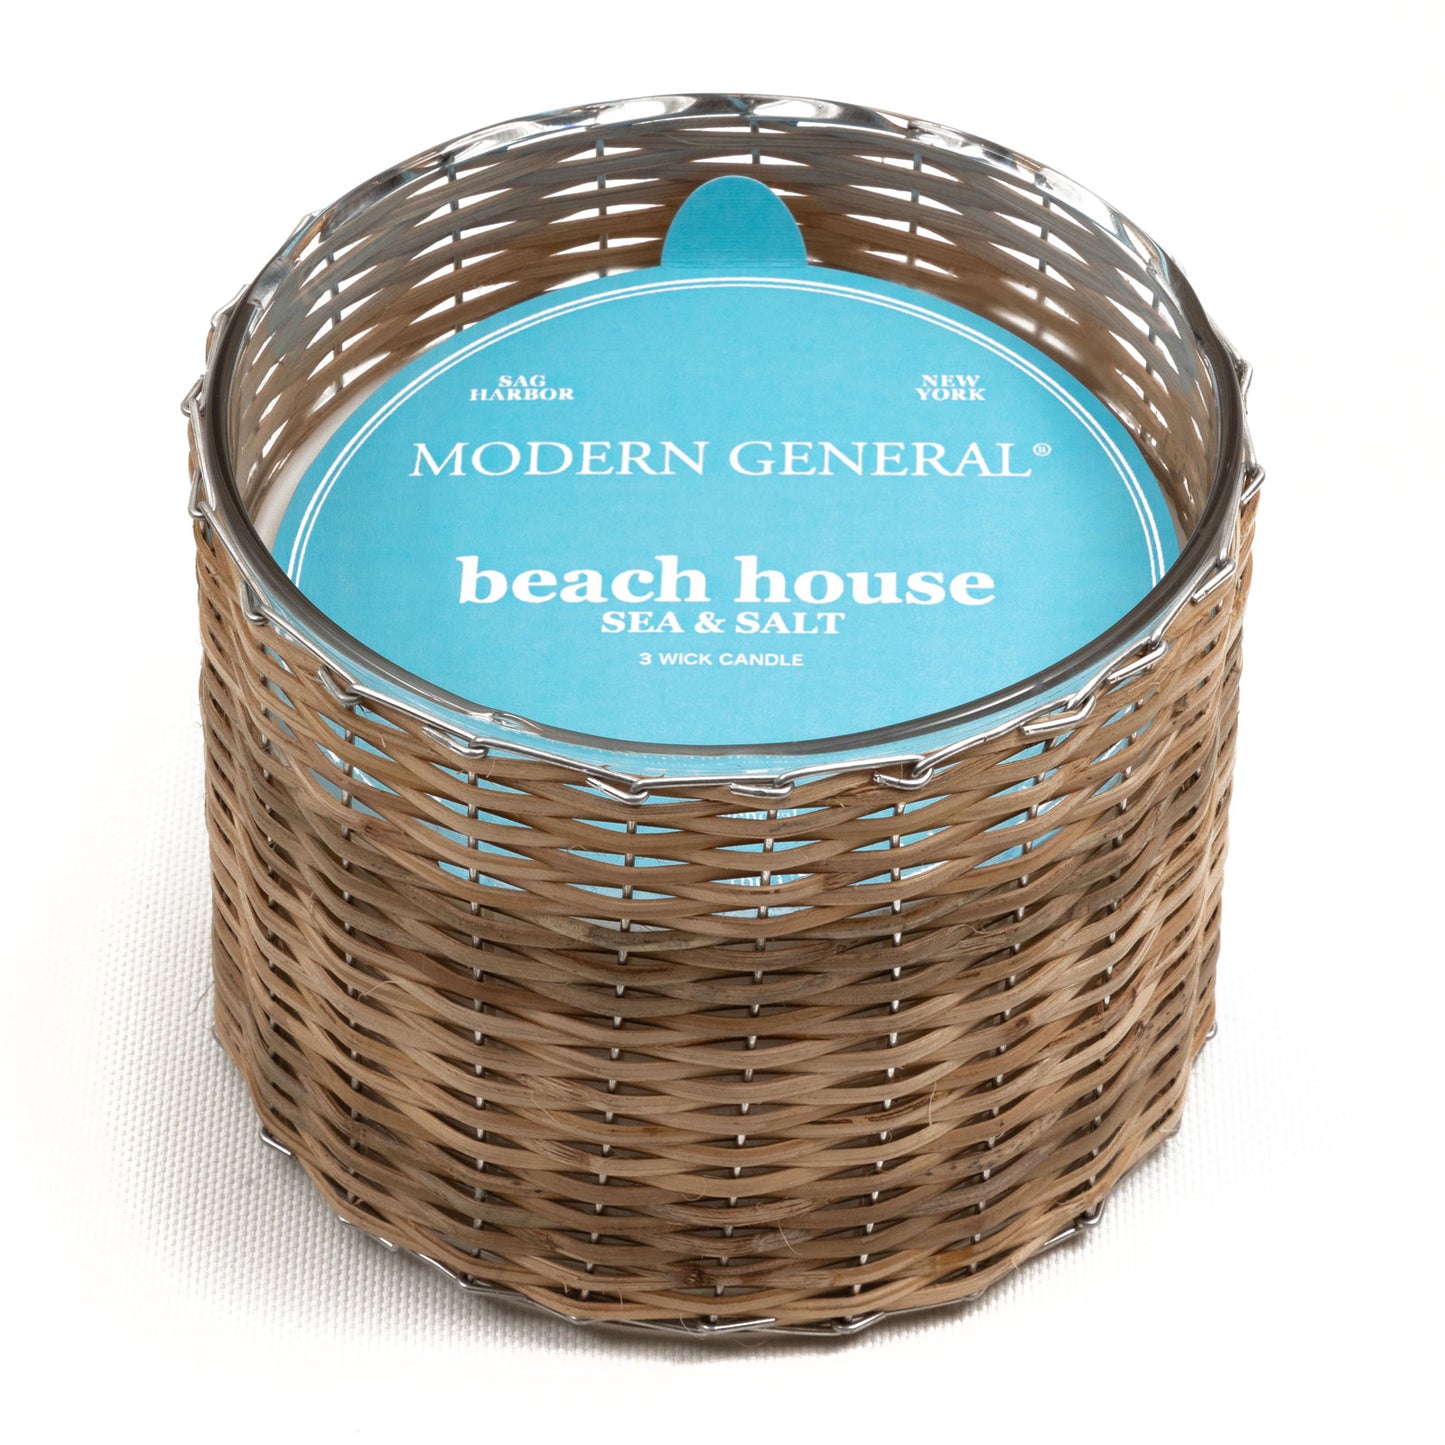 Beach House Woven 3-Wick Candle, 21oz.